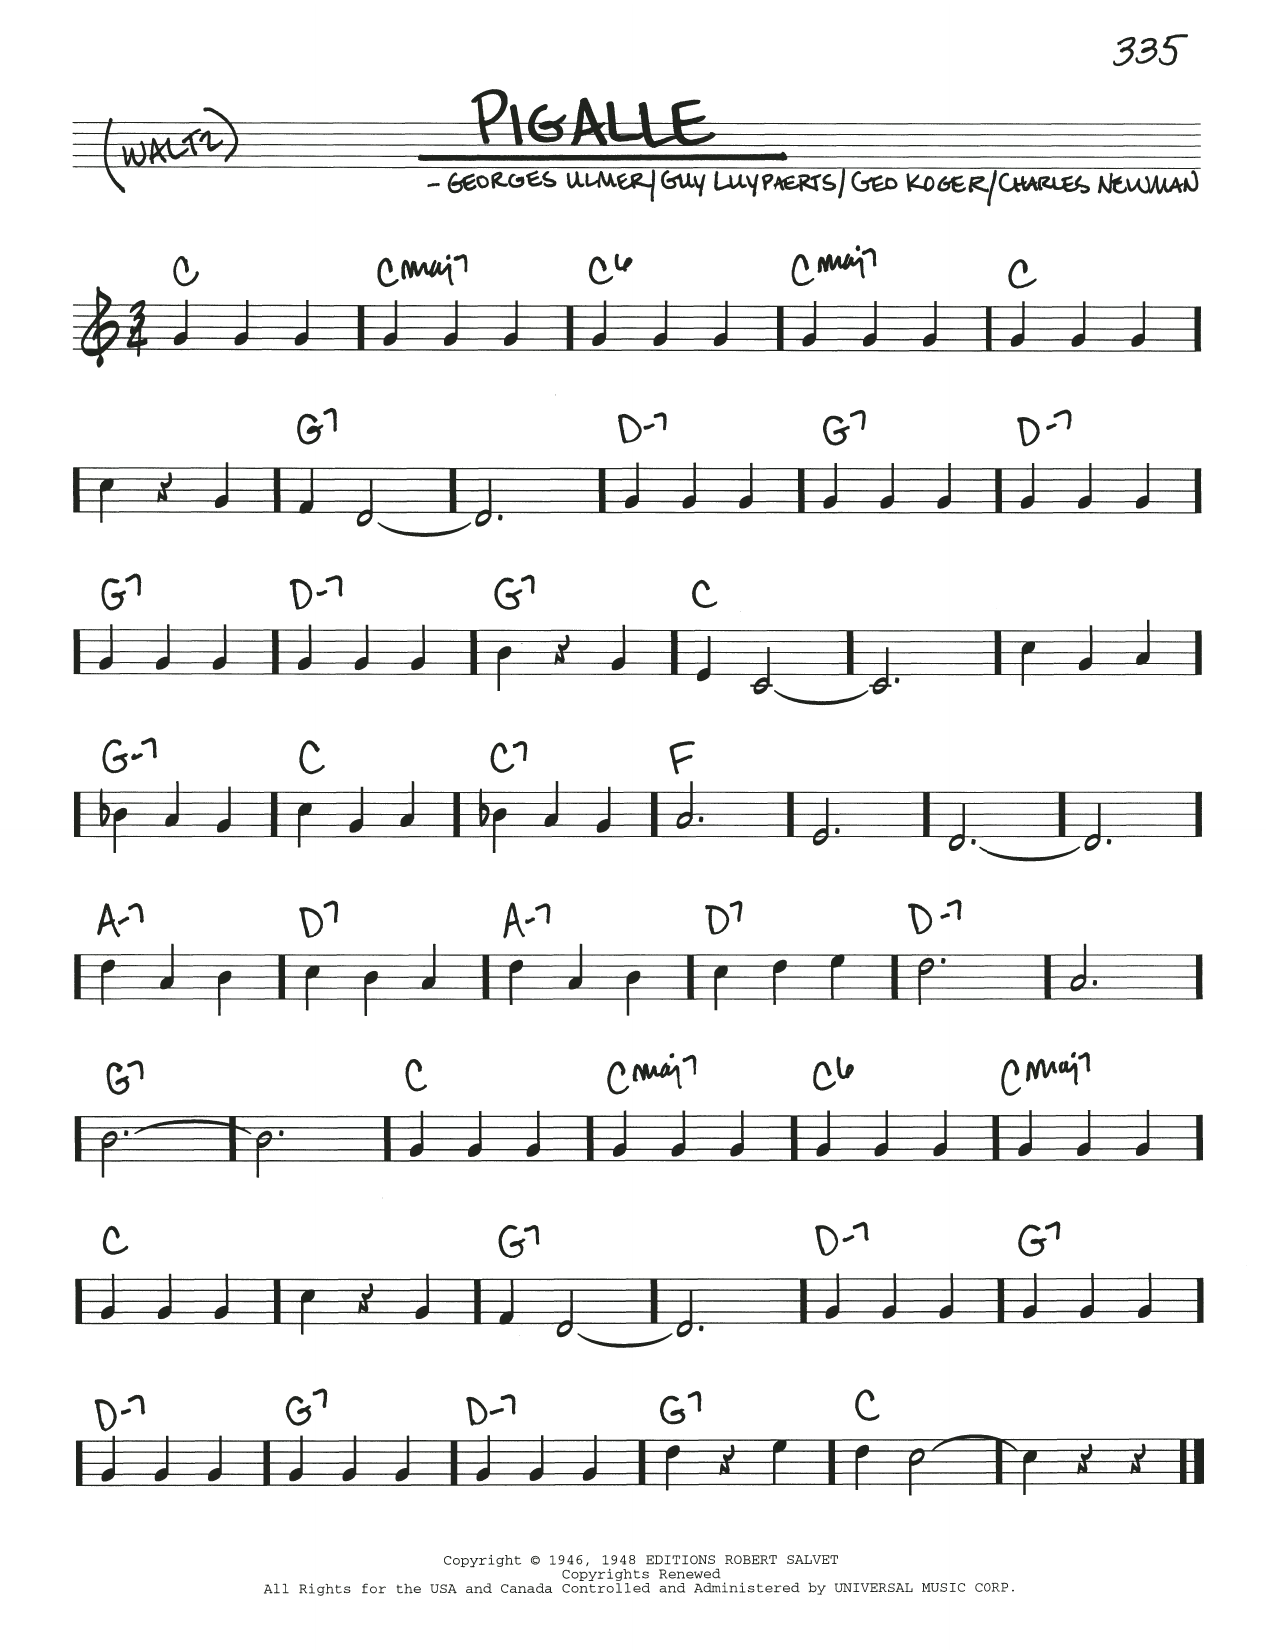 Download Charles Newman Pigalle Sheet Music